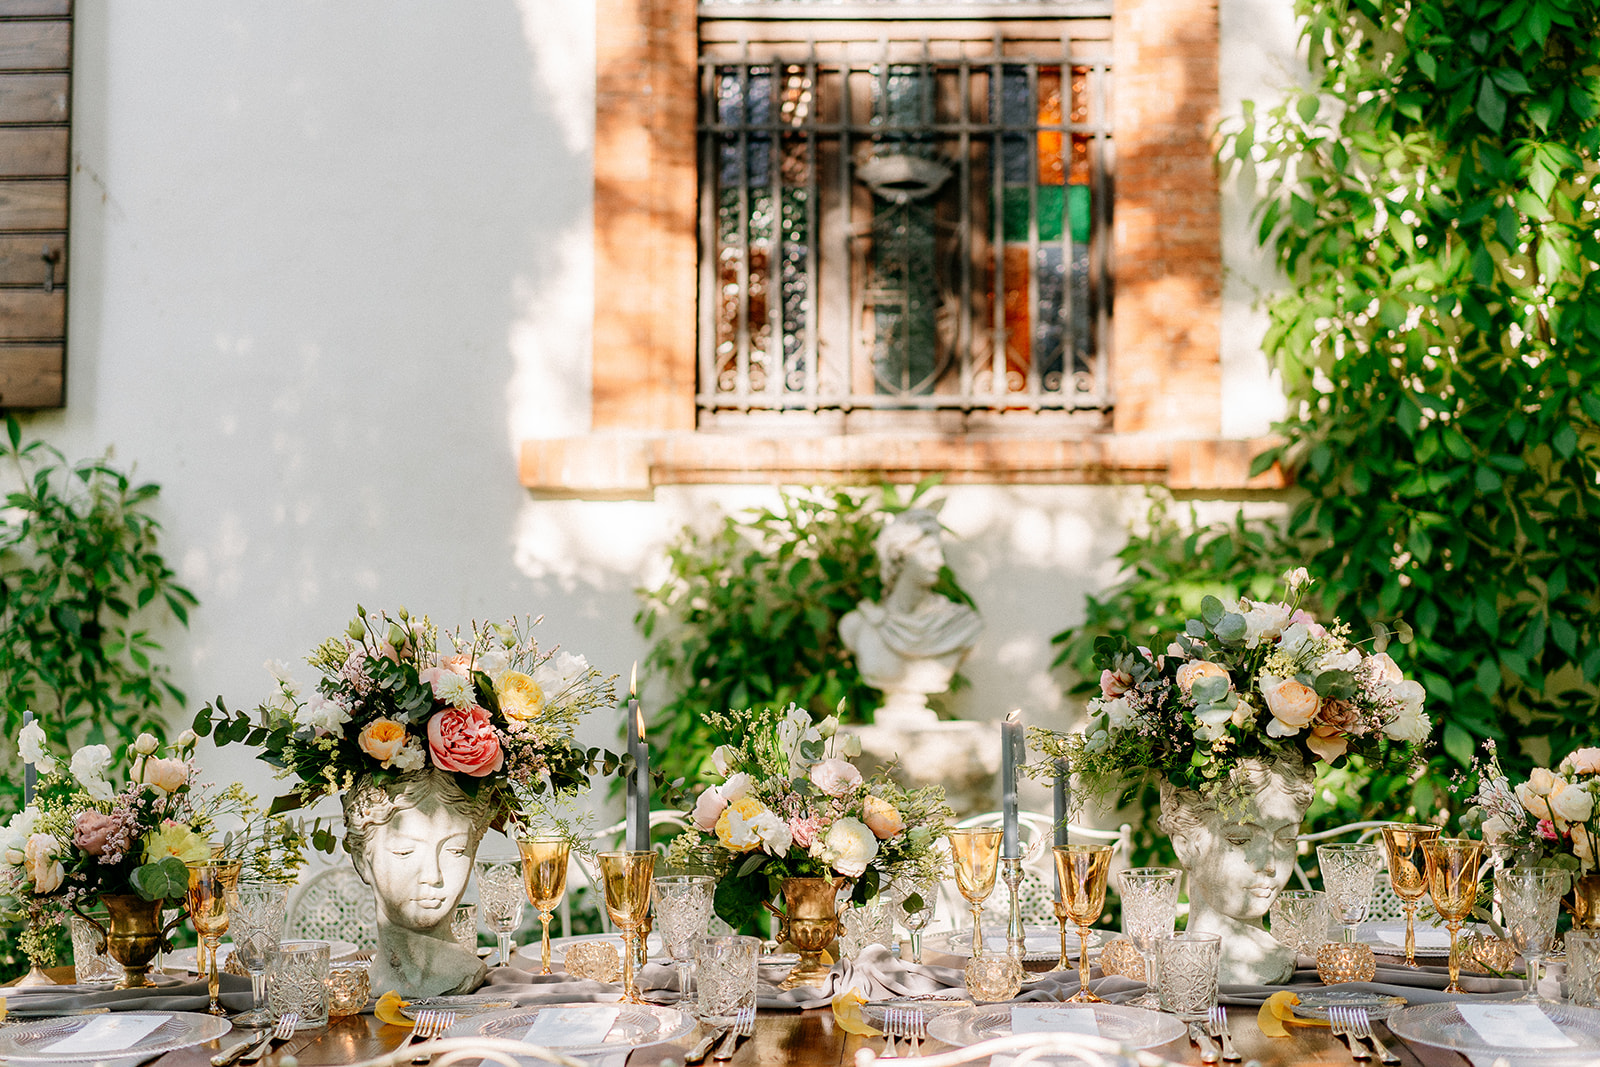 Styled Shoot, Fabriano – Wedding Angels